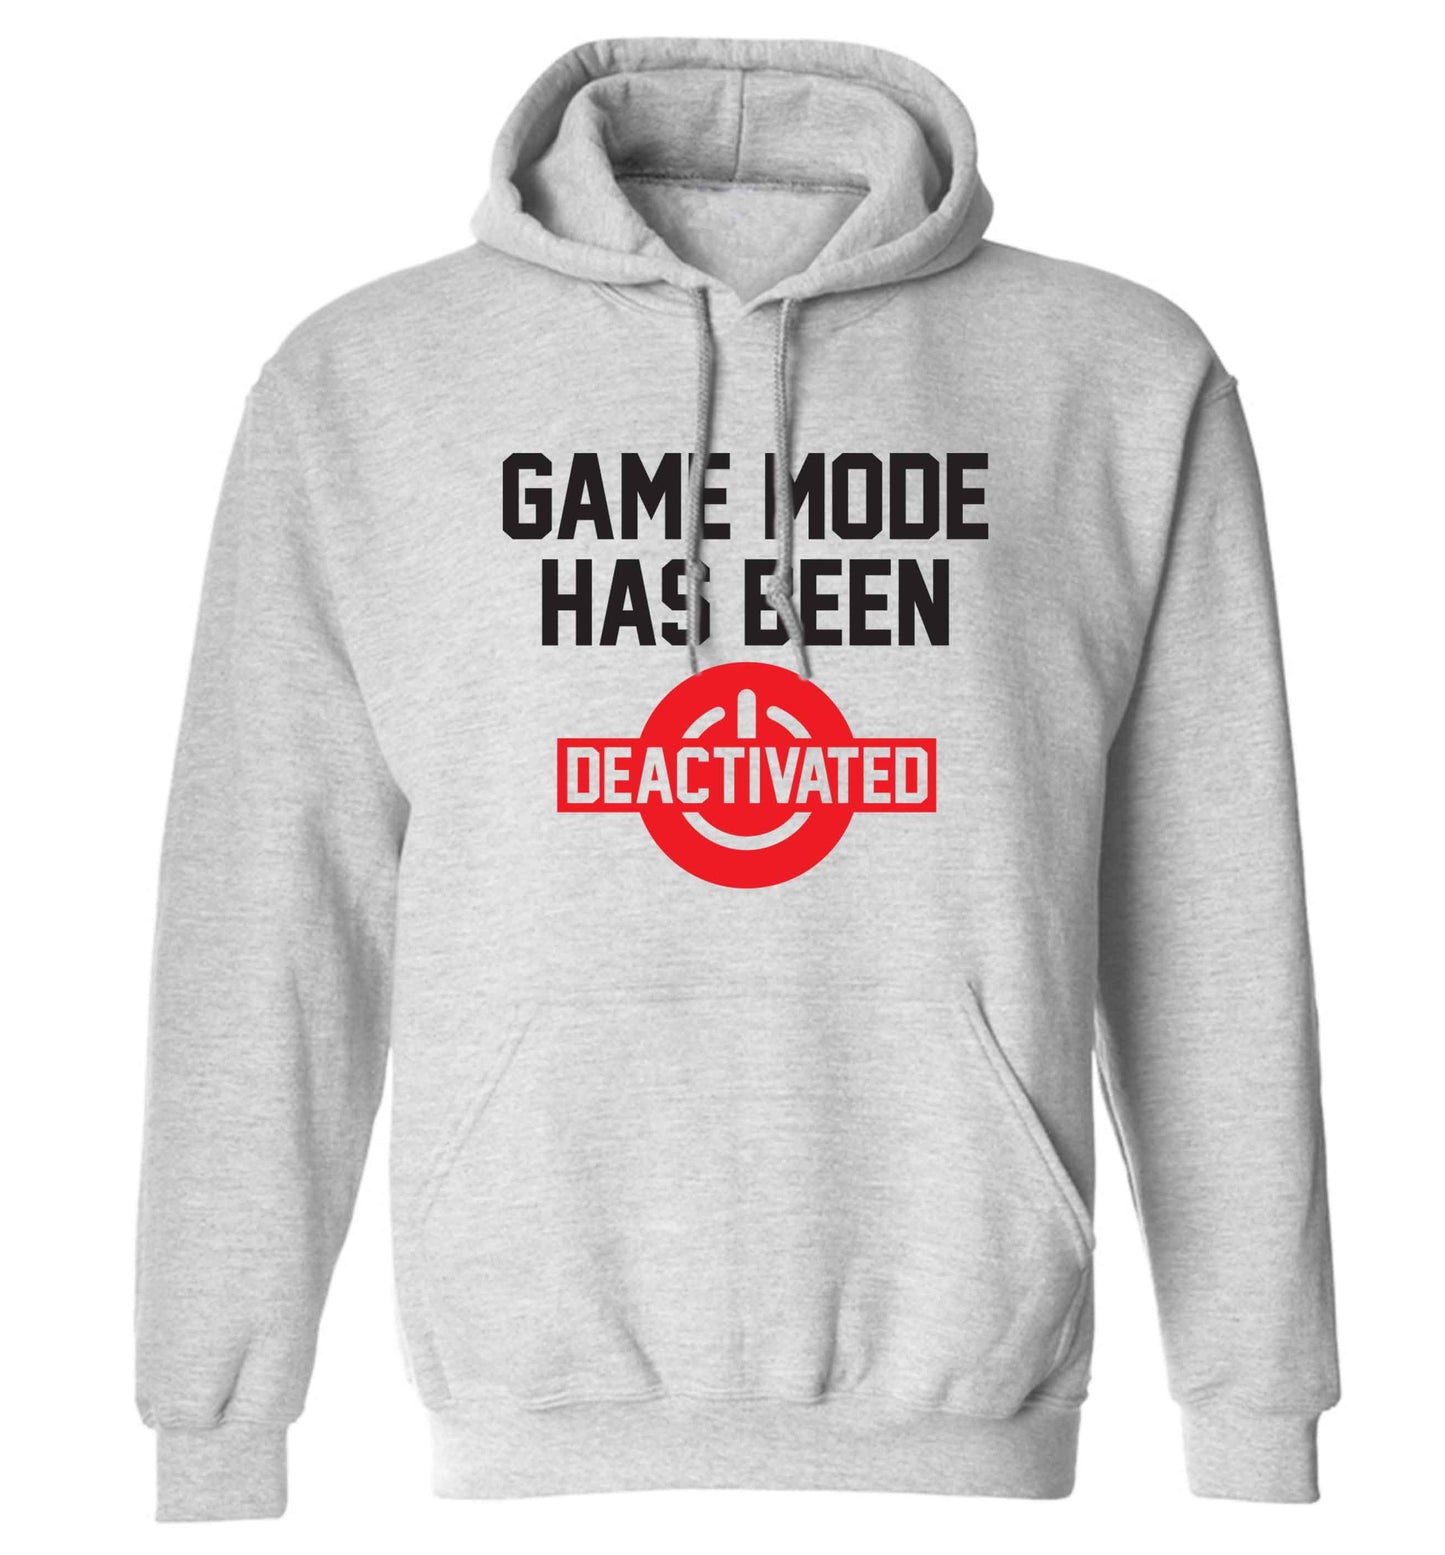 Game Mode Has Been Deactivated adults unisex grey hoodie 2XL